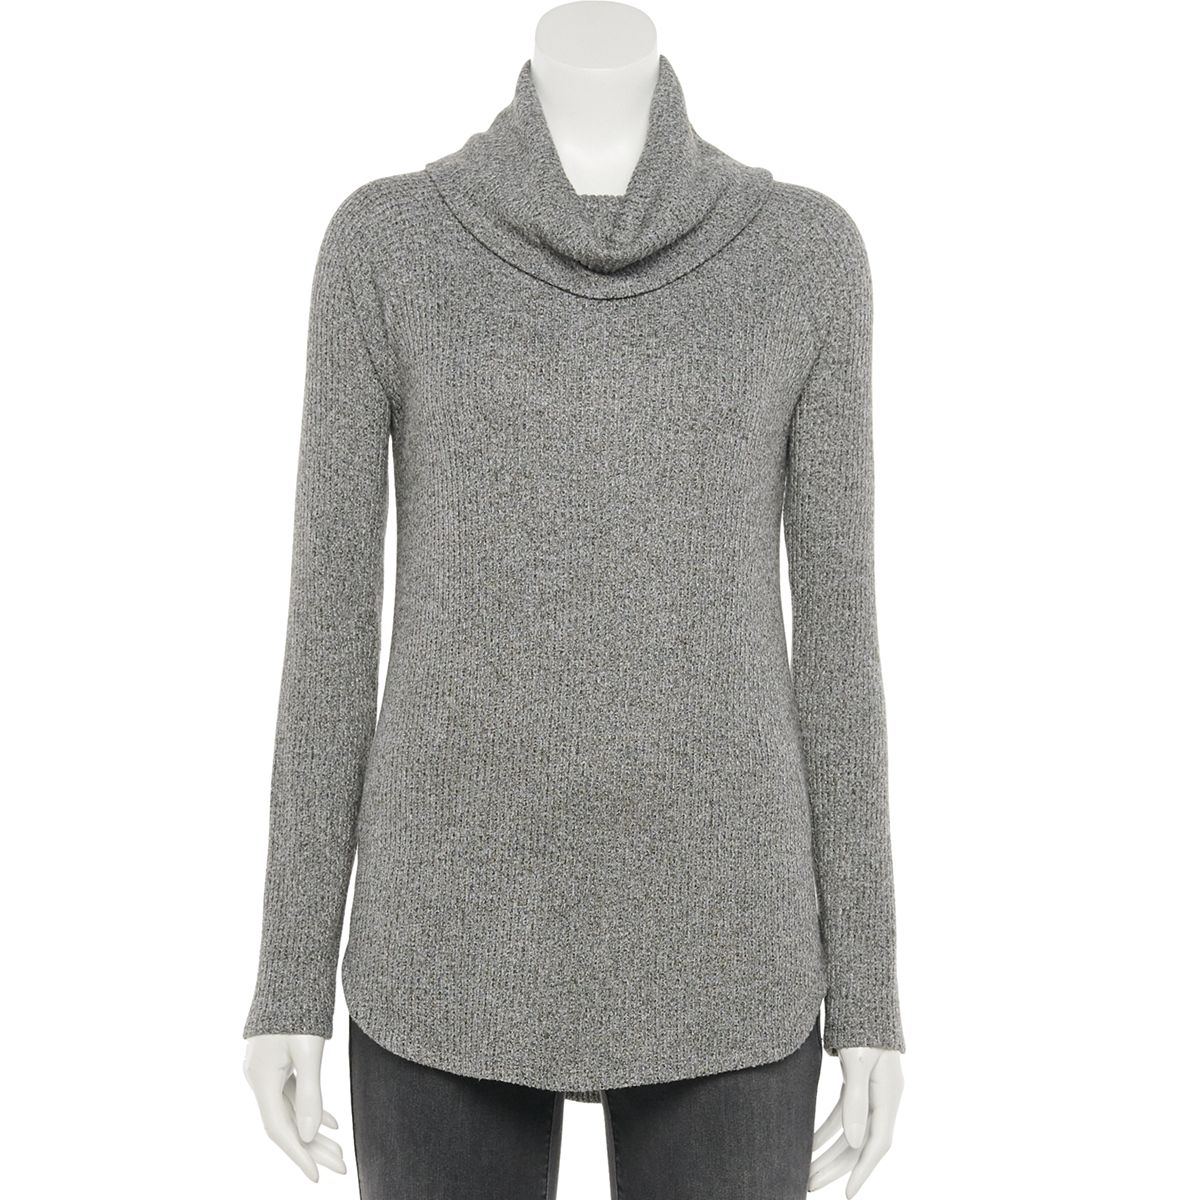 Kohl’s: Up to 90% Off Women’s Sweaters as low as $2.88